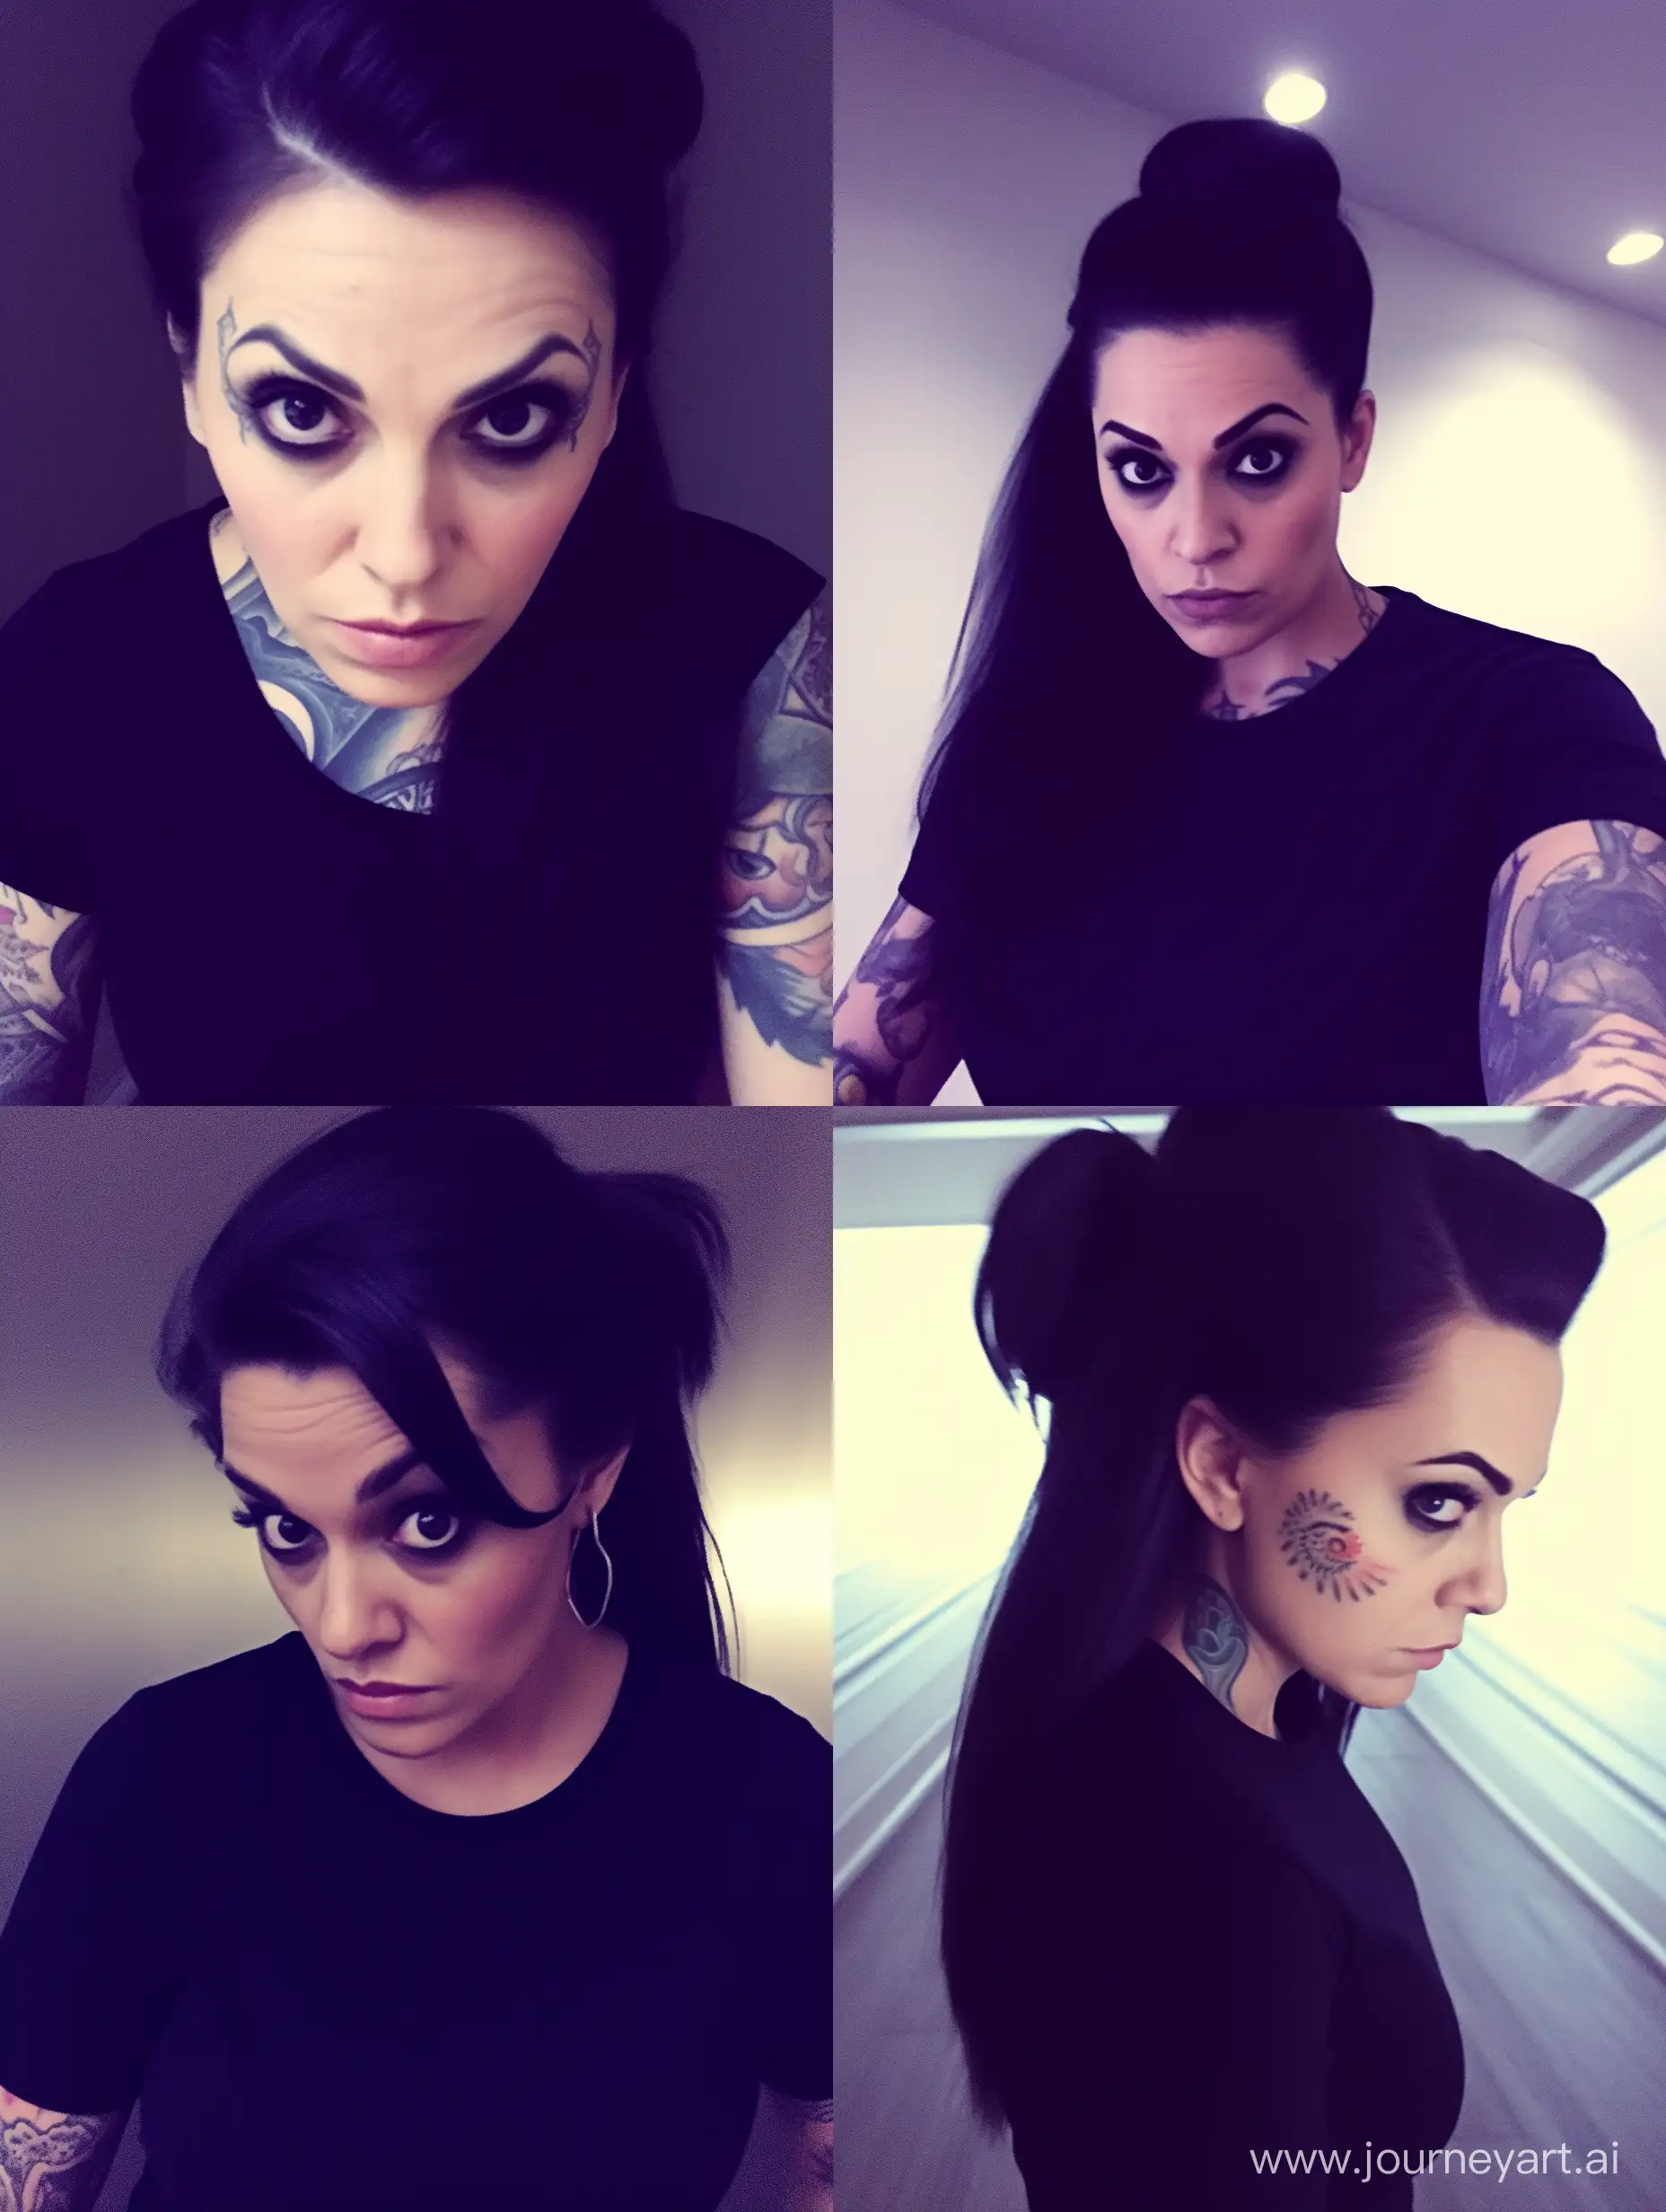 Captivating-Interior-Selfie-Woman-with-Black-Hair-Tattoos-and-Beautiful-Eyes